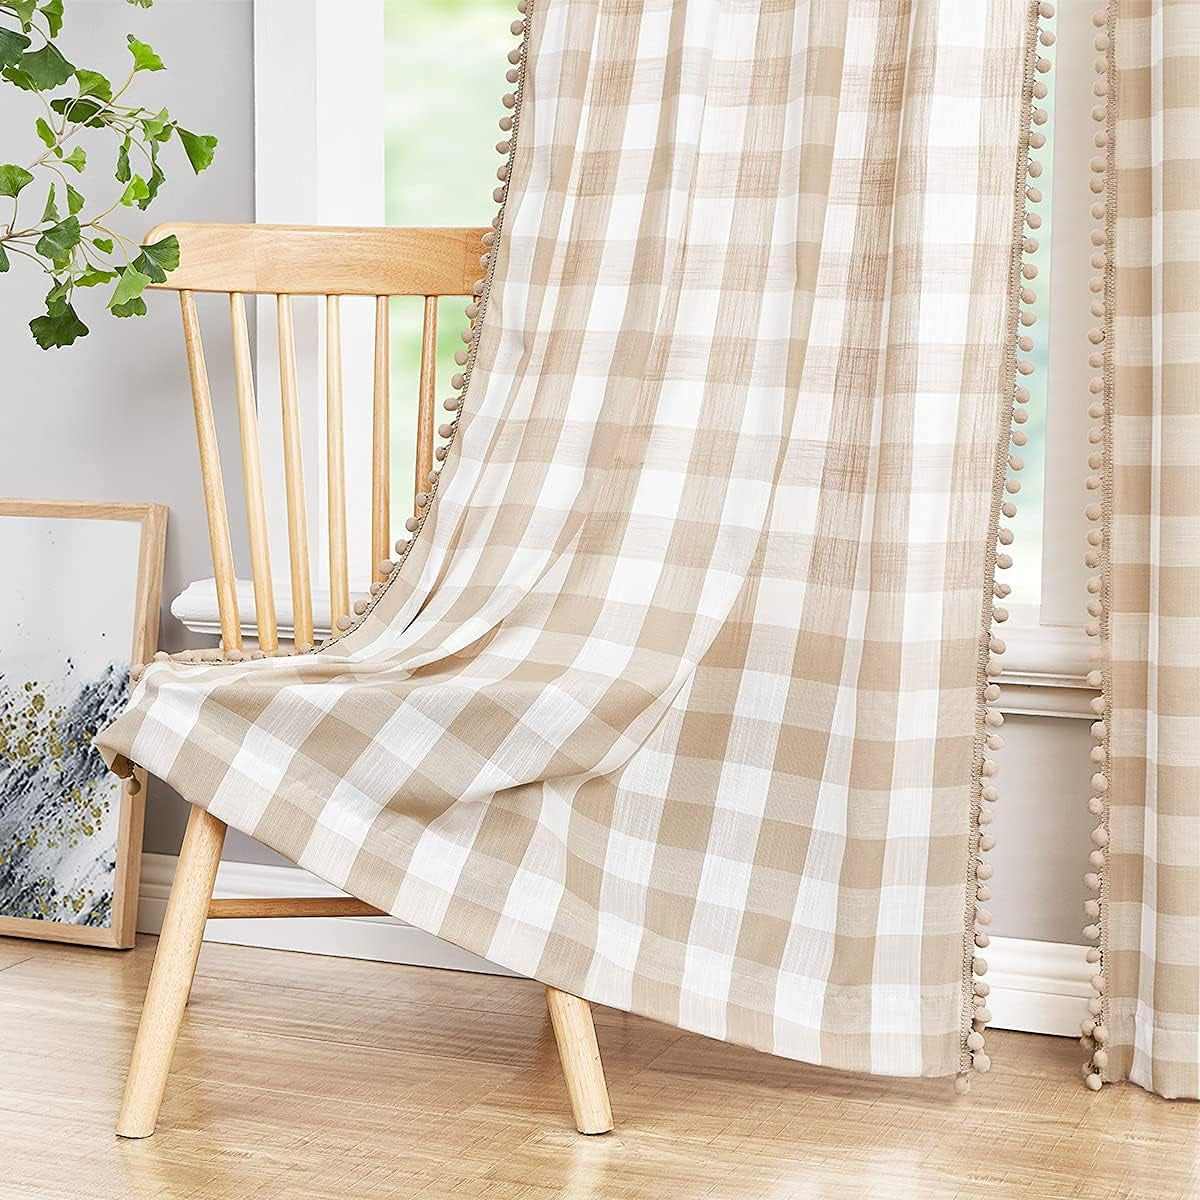 Treatmentex Buffalo Check Curtains 84Inch Farmhouse Pom Pom Drapes for Living Room Vintage Gingham Plaid Semi Sheer Tan Window Curtains for Bedroom Kitchen 2 Panels Rod Pocket Taupe and White  Natural Decoratex Taupe And White 40"W X 95"L 2Pcs 